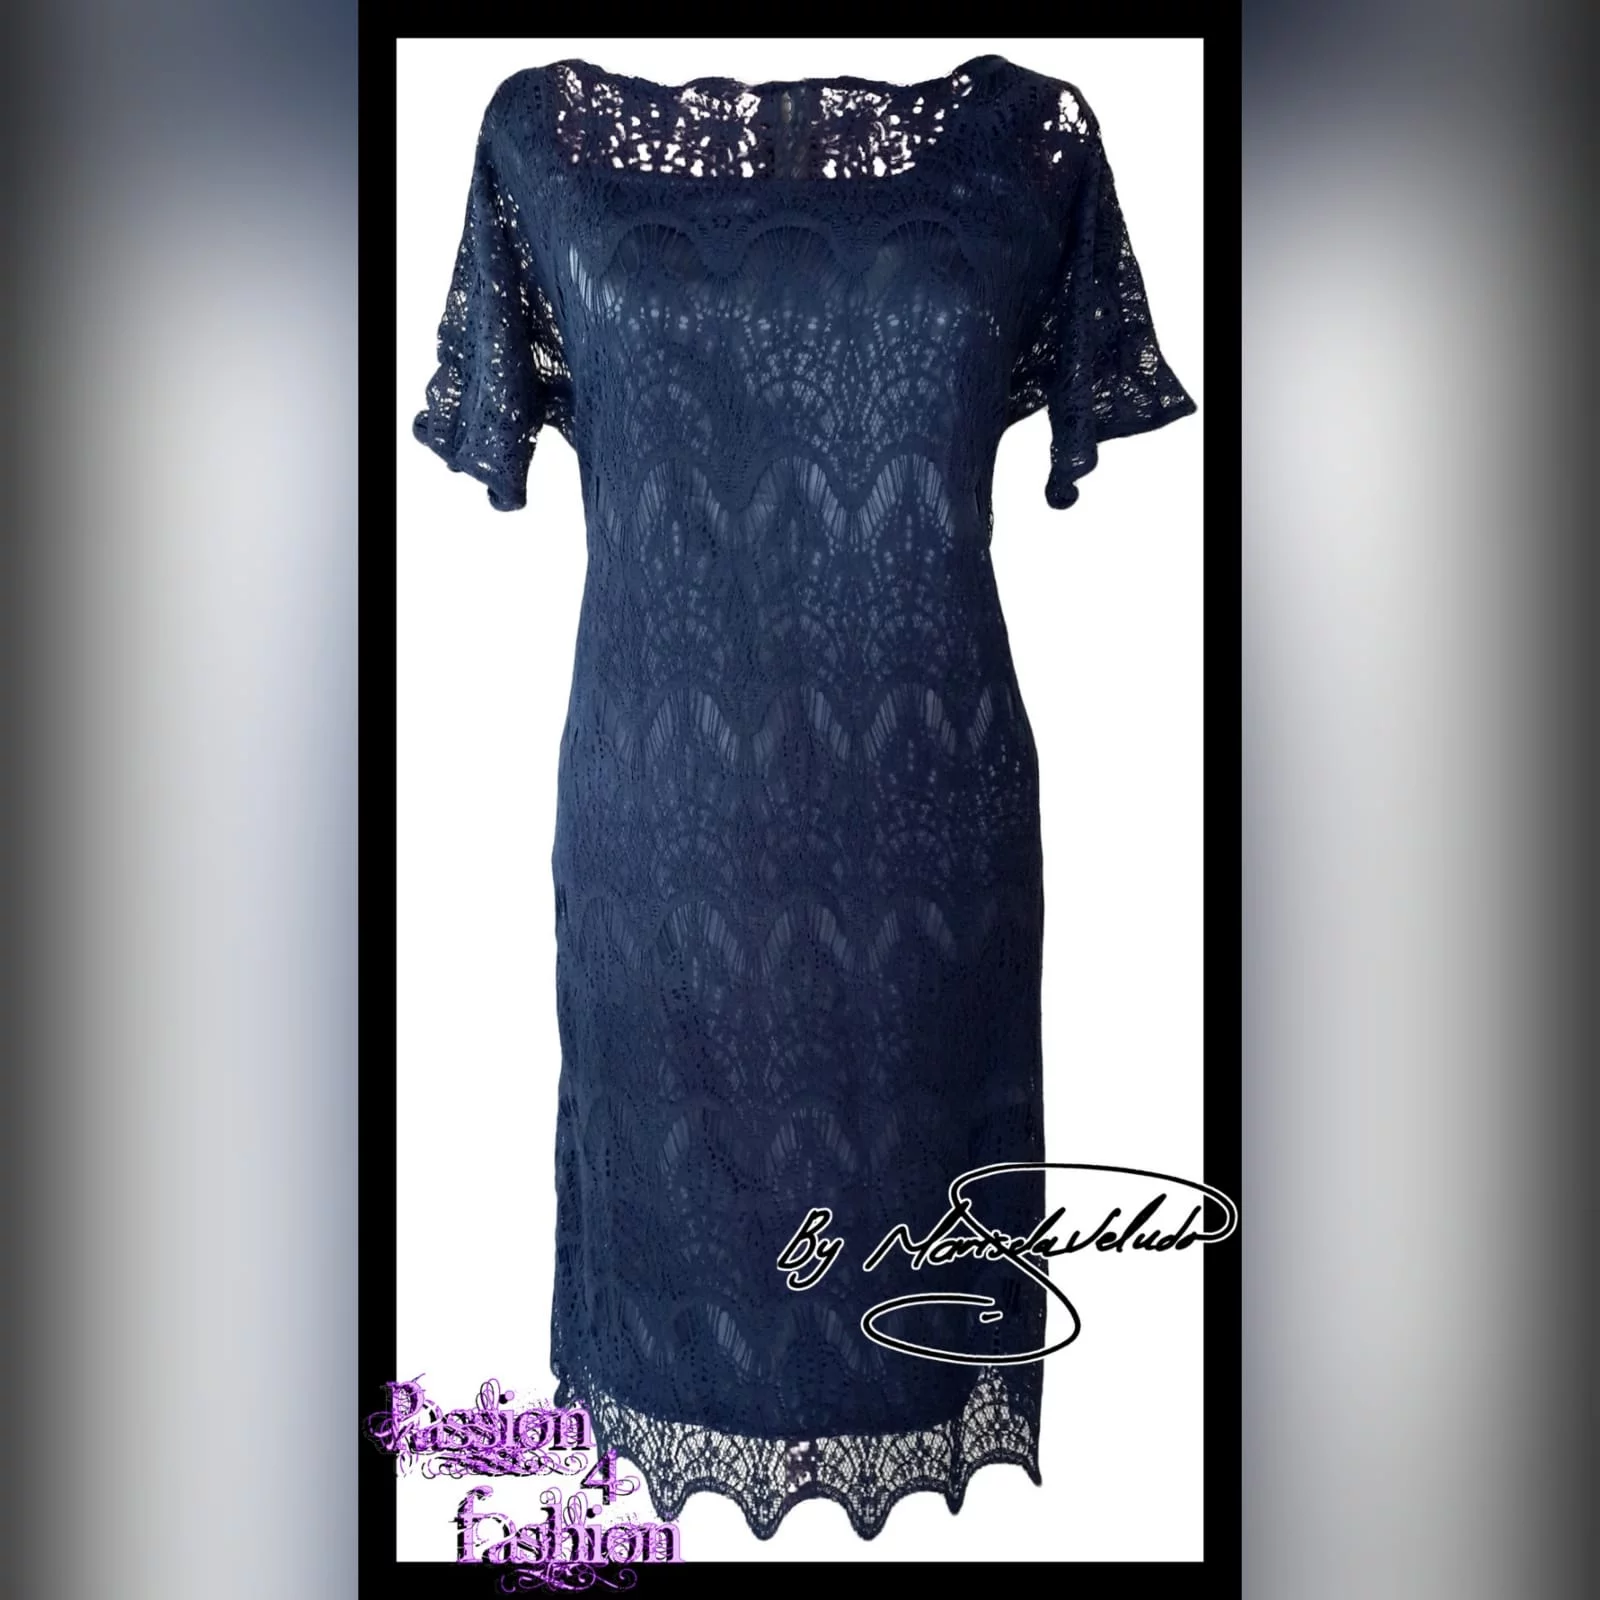 Navy blue short mother of the bride dress 2 navy blue short knee length mother of the bride dress, fully laced with a scallop hem and short sheer lace sleeves